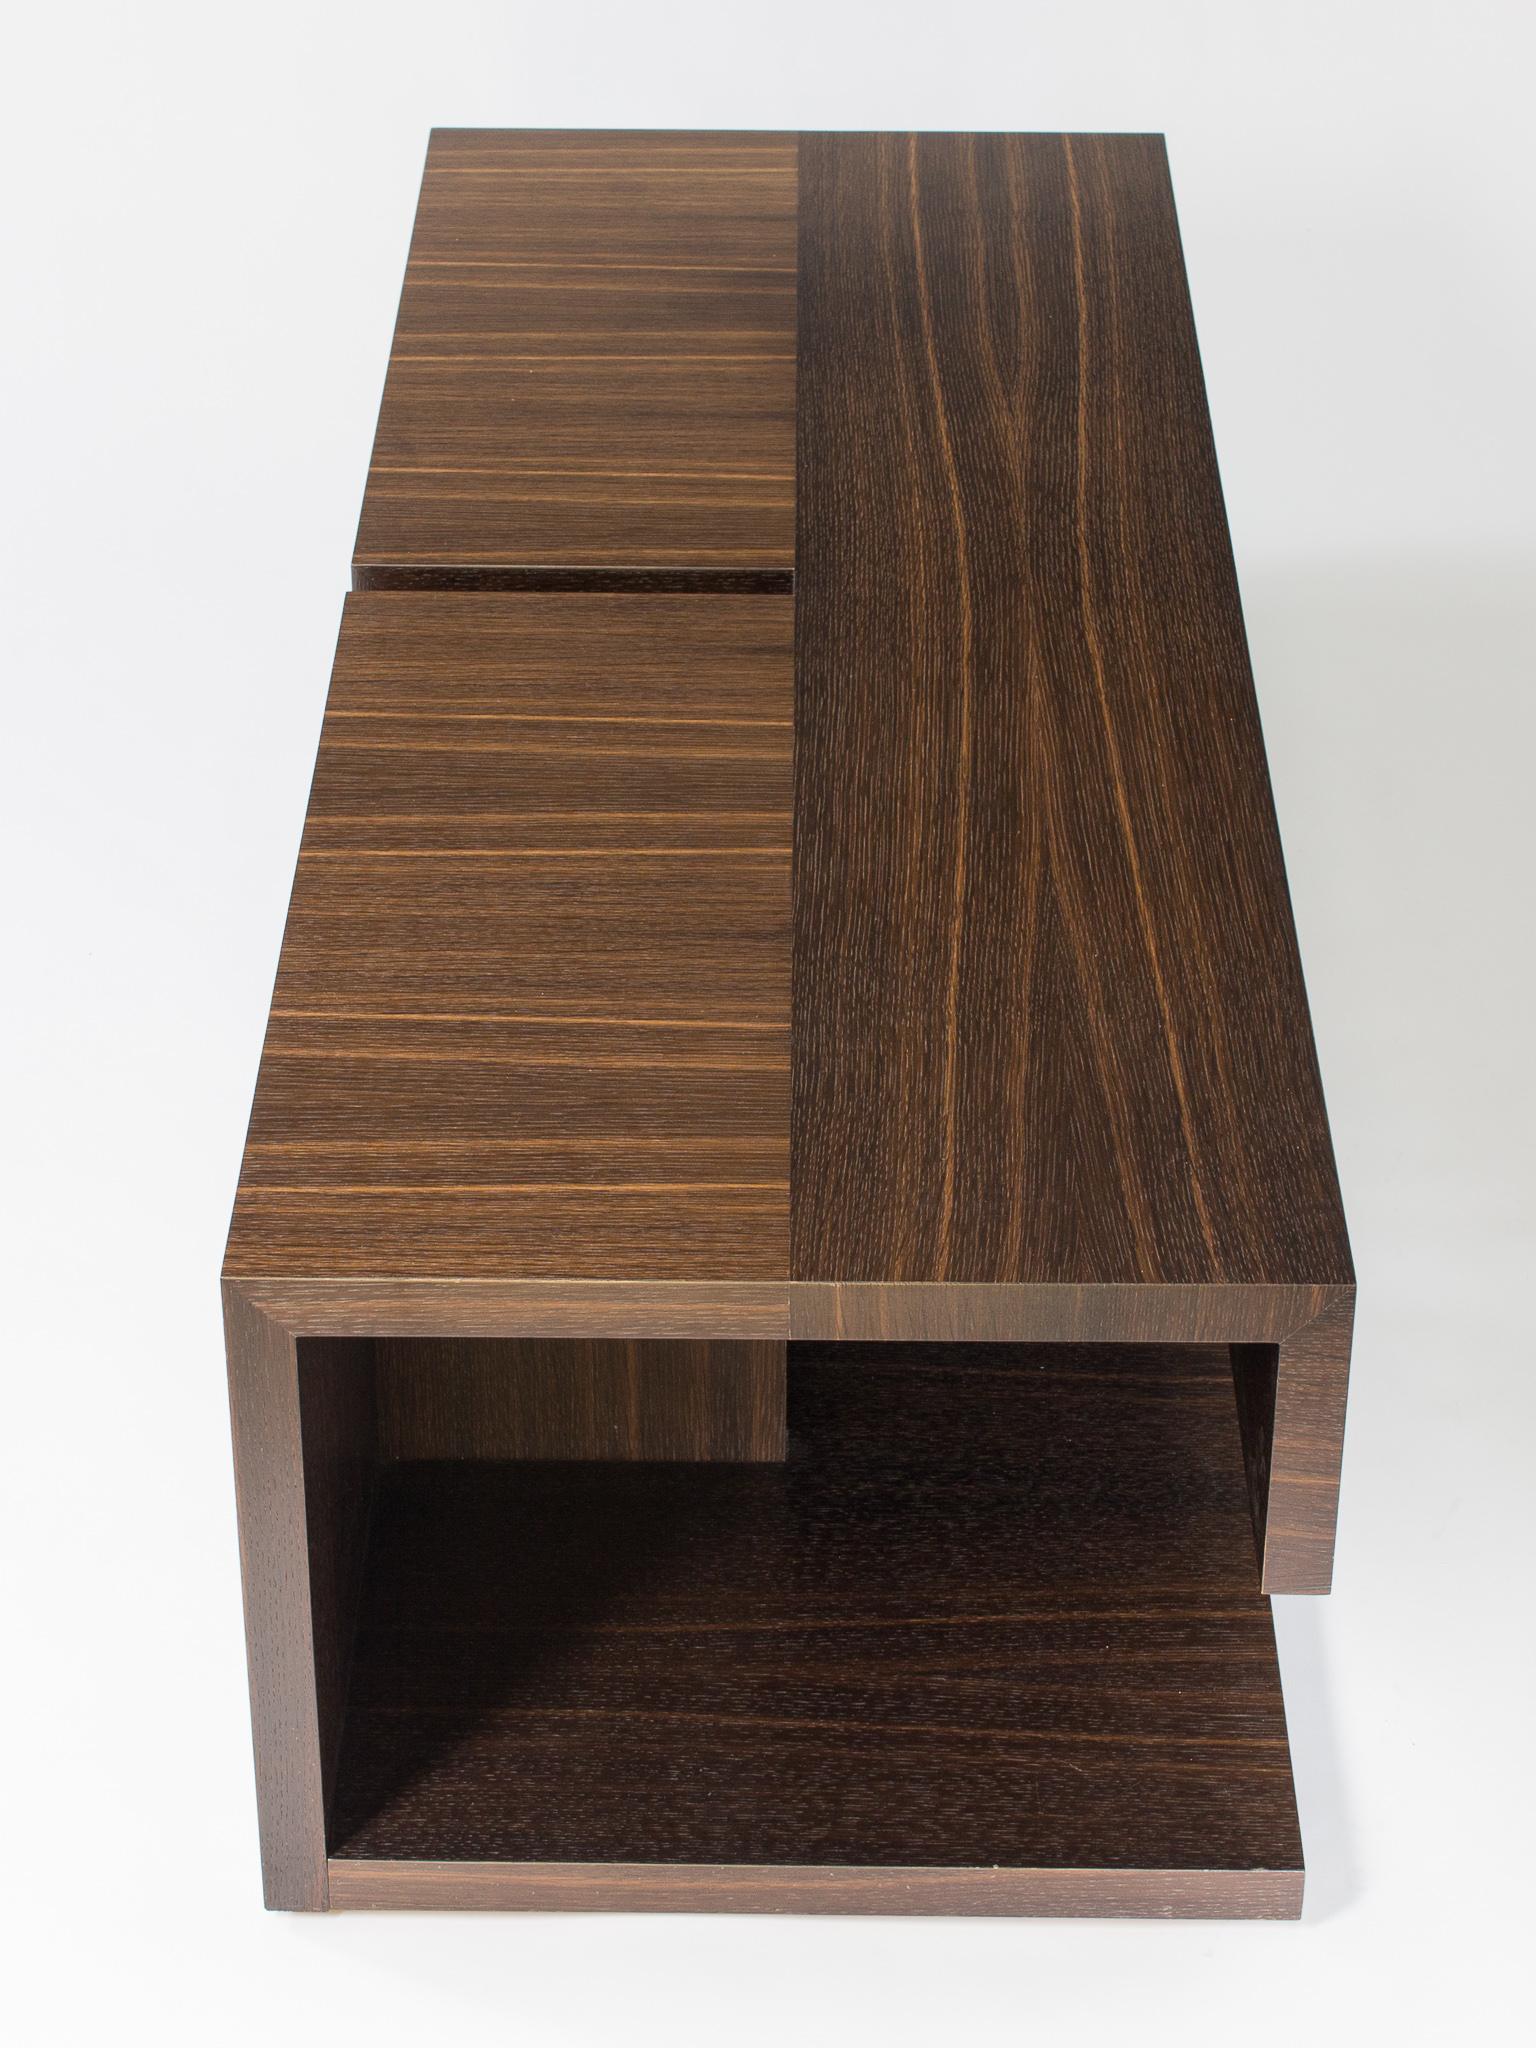 This version of our modern wood coffee table is called the 